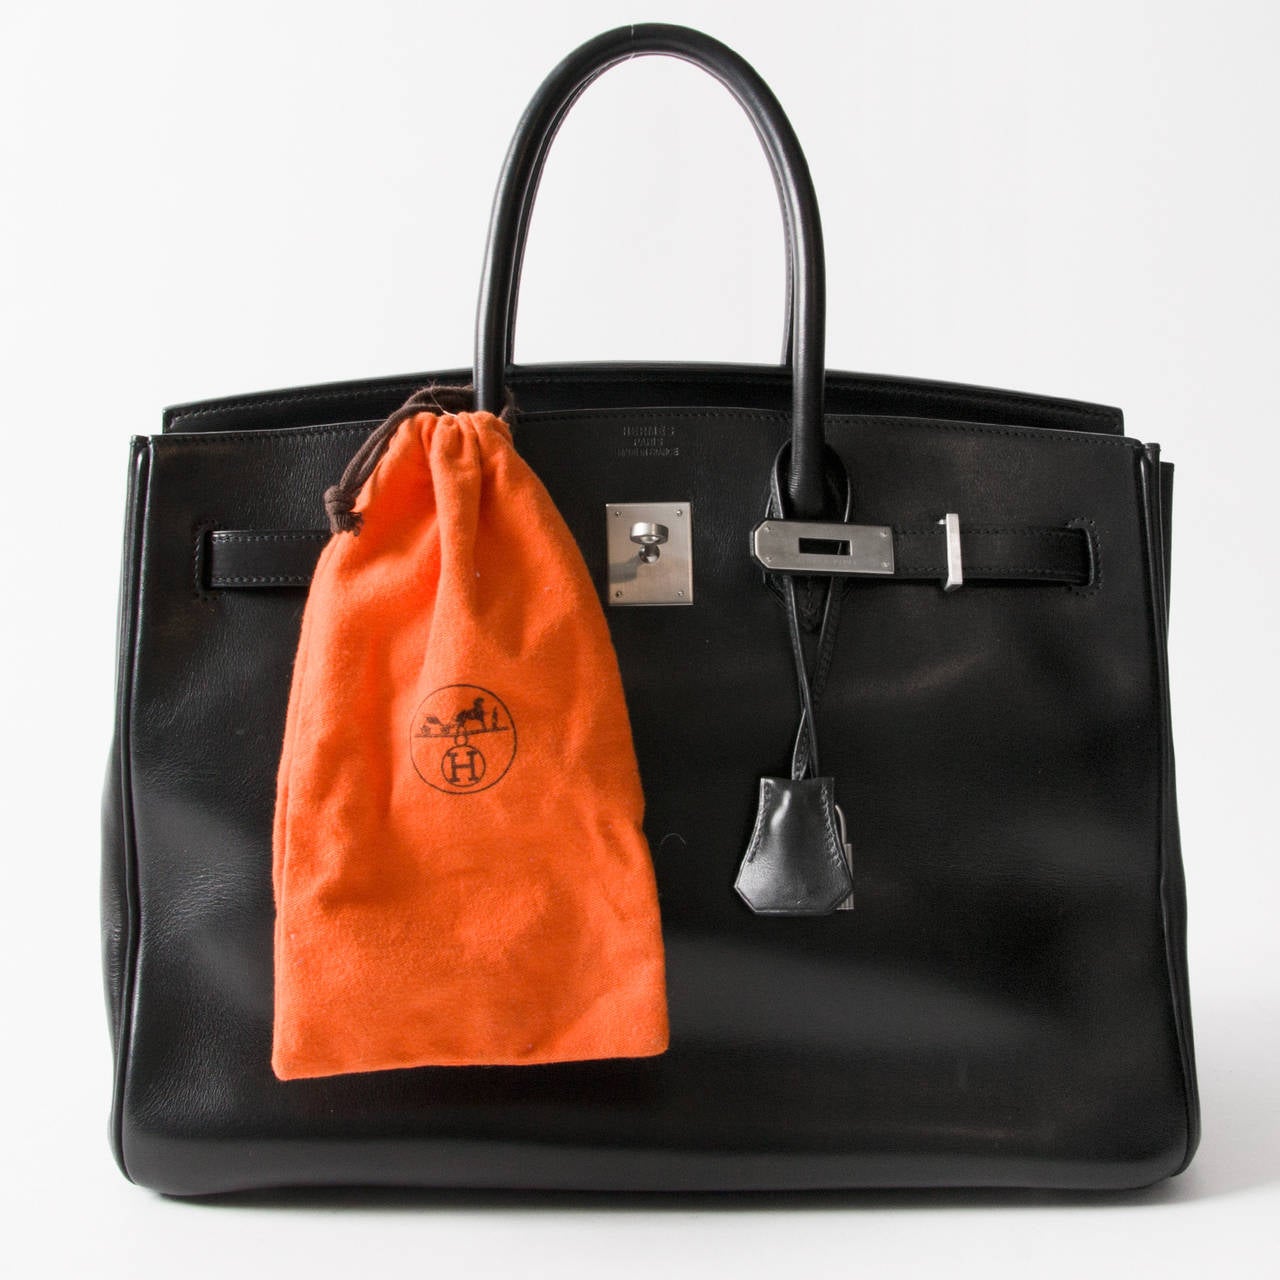 Hermes Birkin Bag 35 cm in beautiful boxcalf leather. 
The Hermes Birkin is now the symbol of class and fashion. It’s highly recognizable design makes it a staple of the fashion industry and it’s gorgeous craftsmanship gives it the appeal every